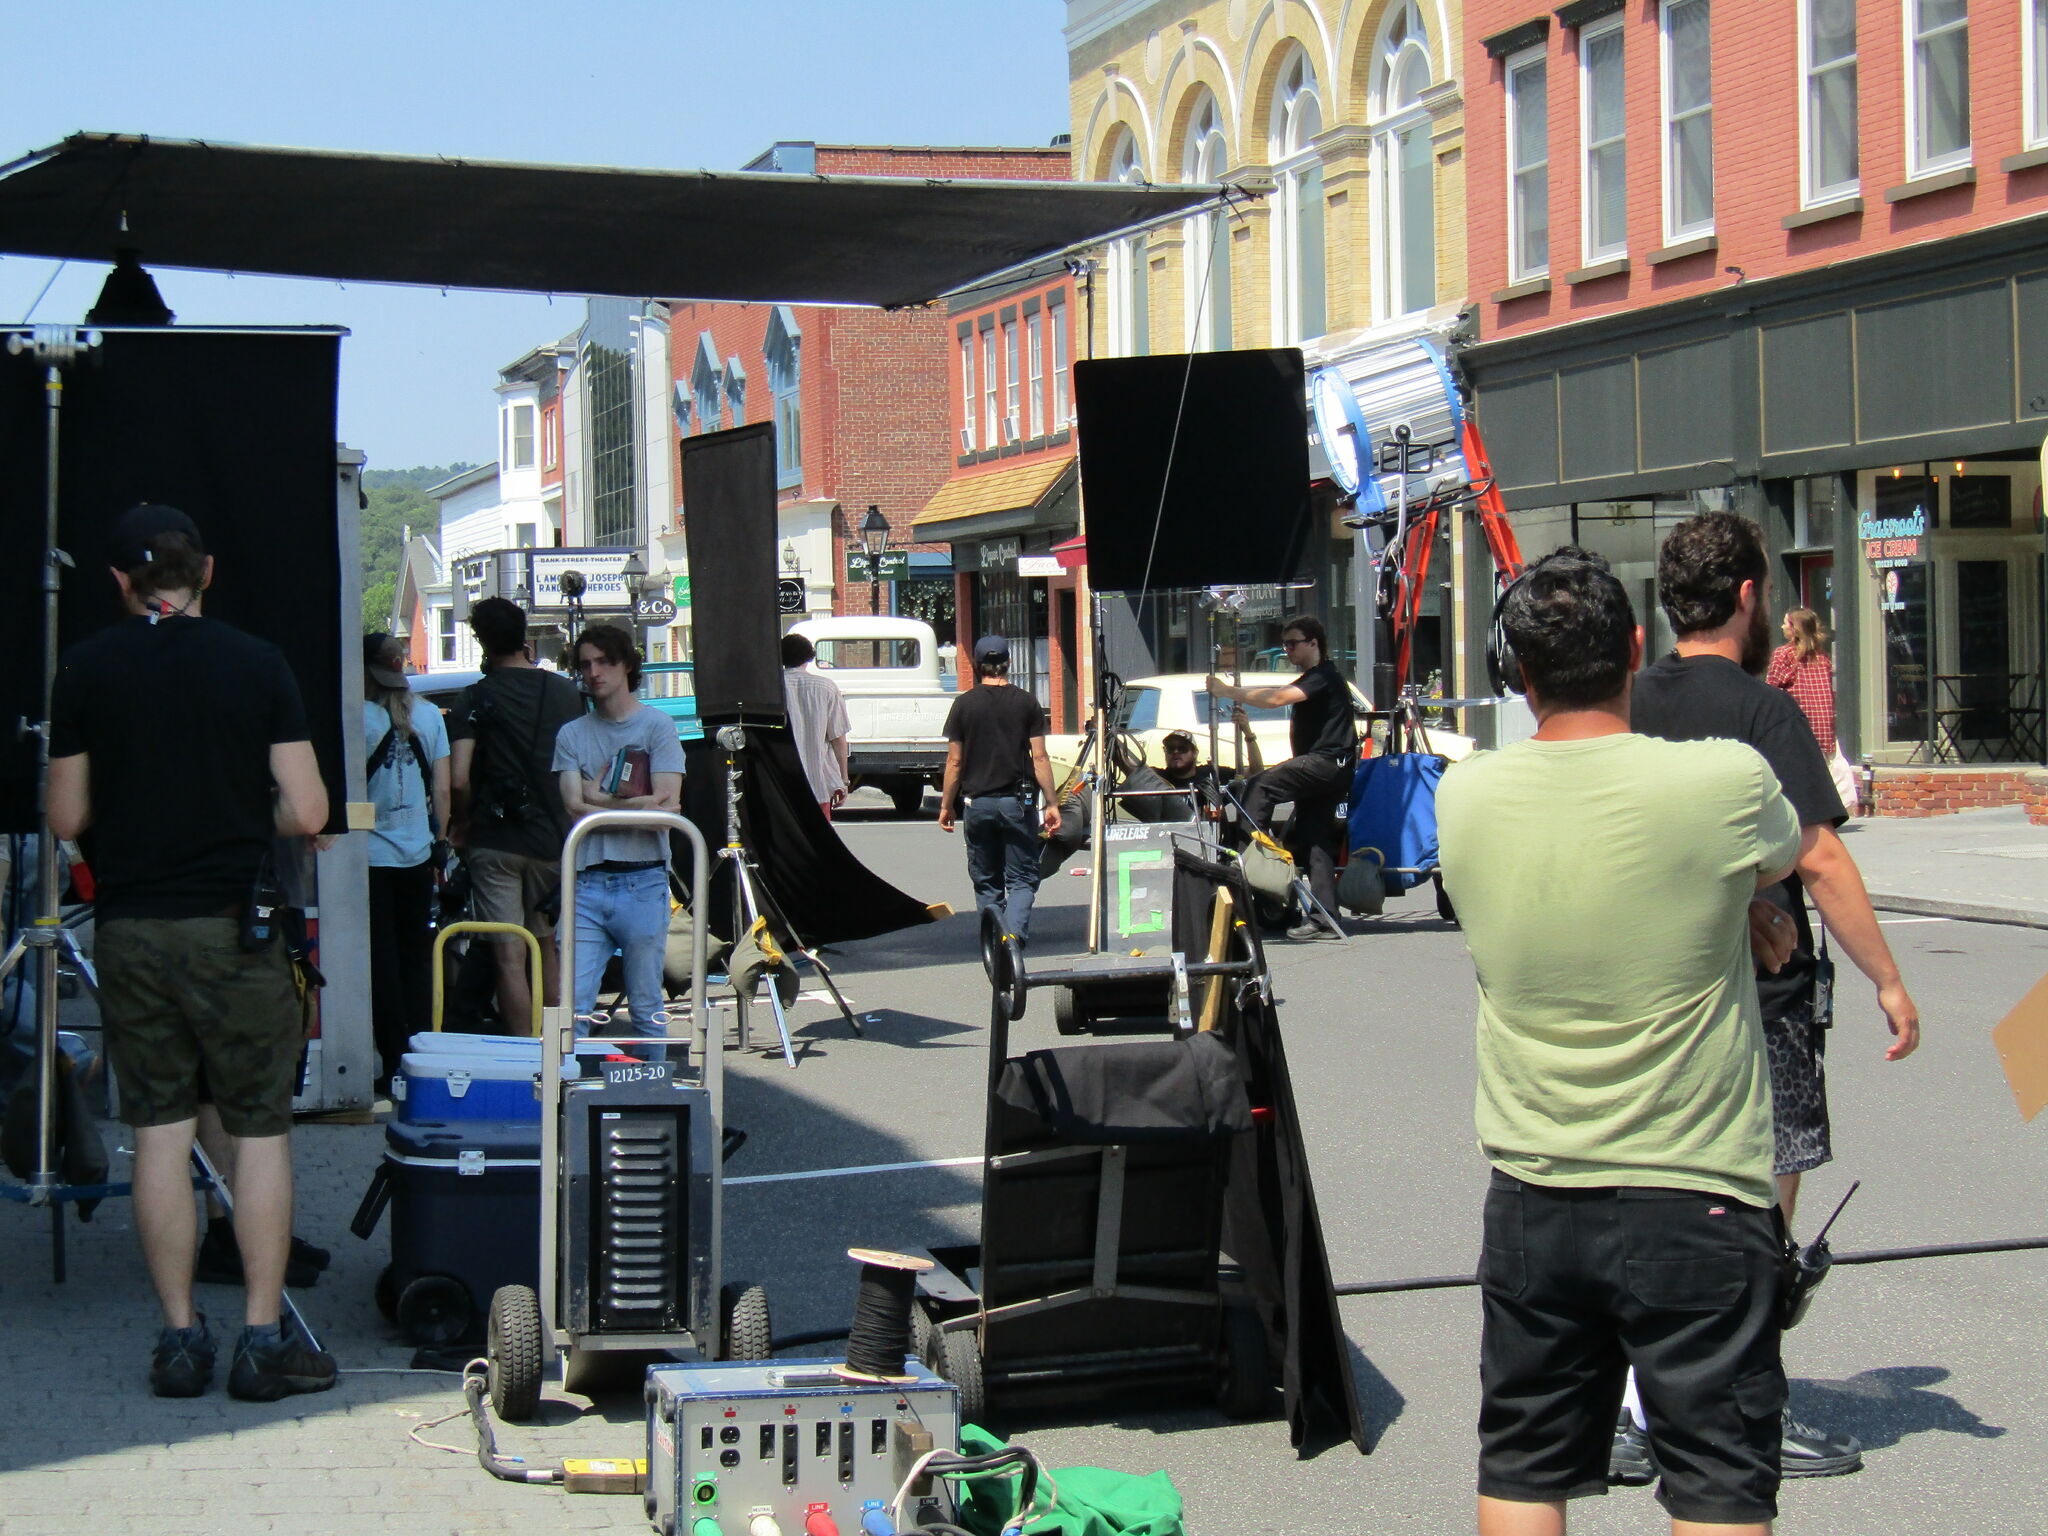 New Milford's Bank Street, reimagined as a 1970s Canadian town for the filming of "Summerhouse".